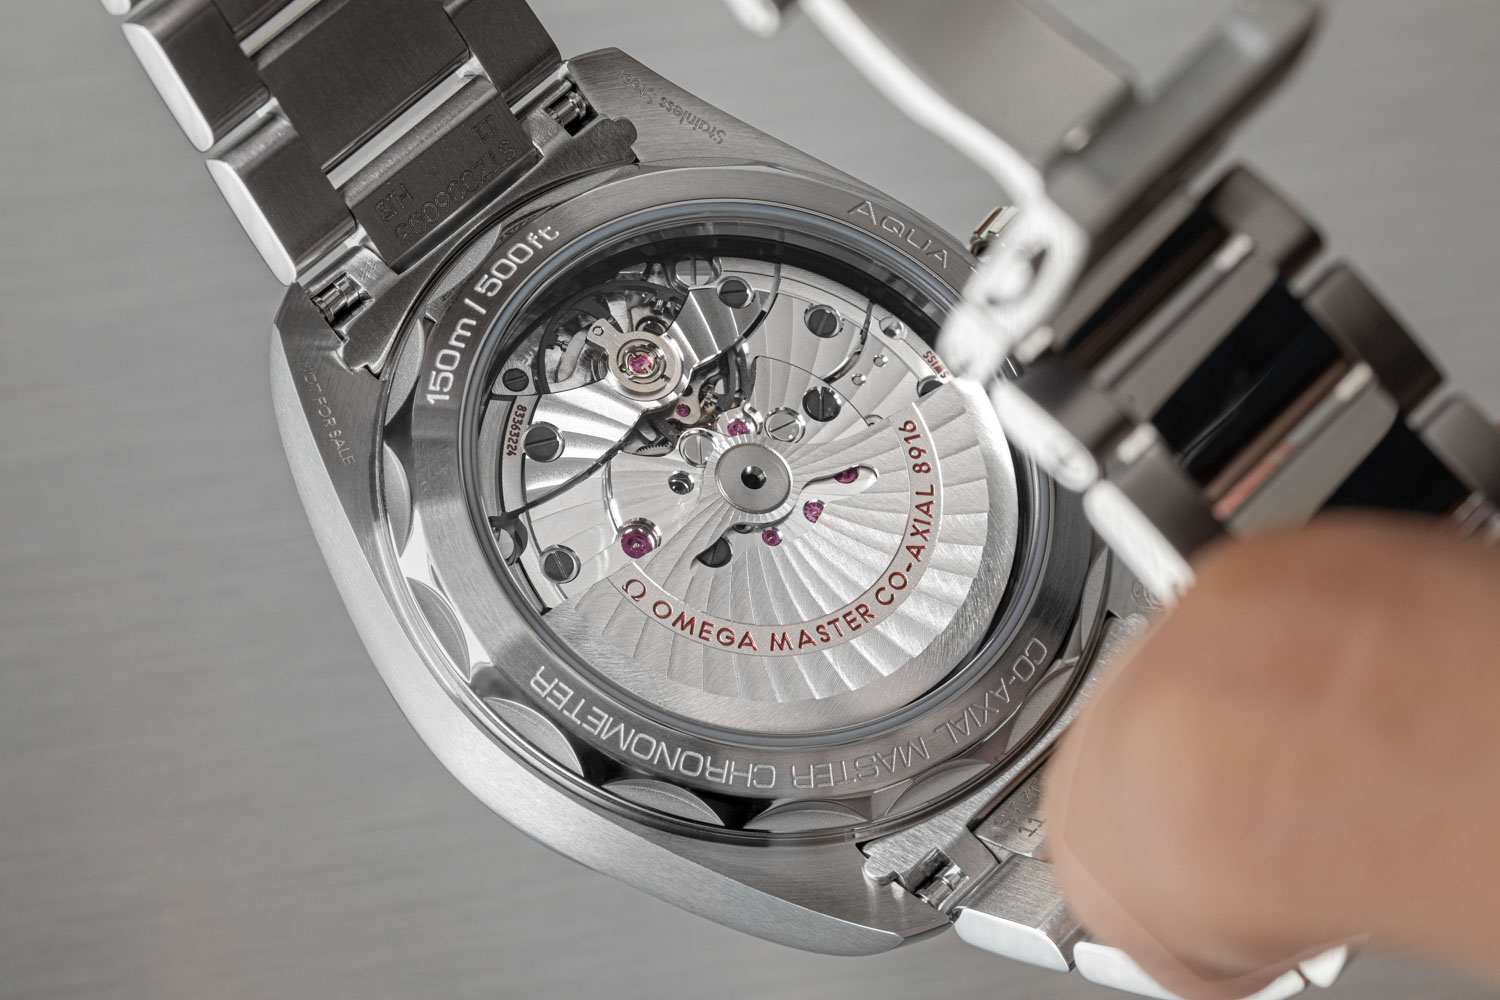 The Aqua Terra 150m Co‑Axial Master Chronometer Small Seconds 41mm in stainless steel is run by the Co-Axial Master Chronometer calibre 8916 (©Revolution)